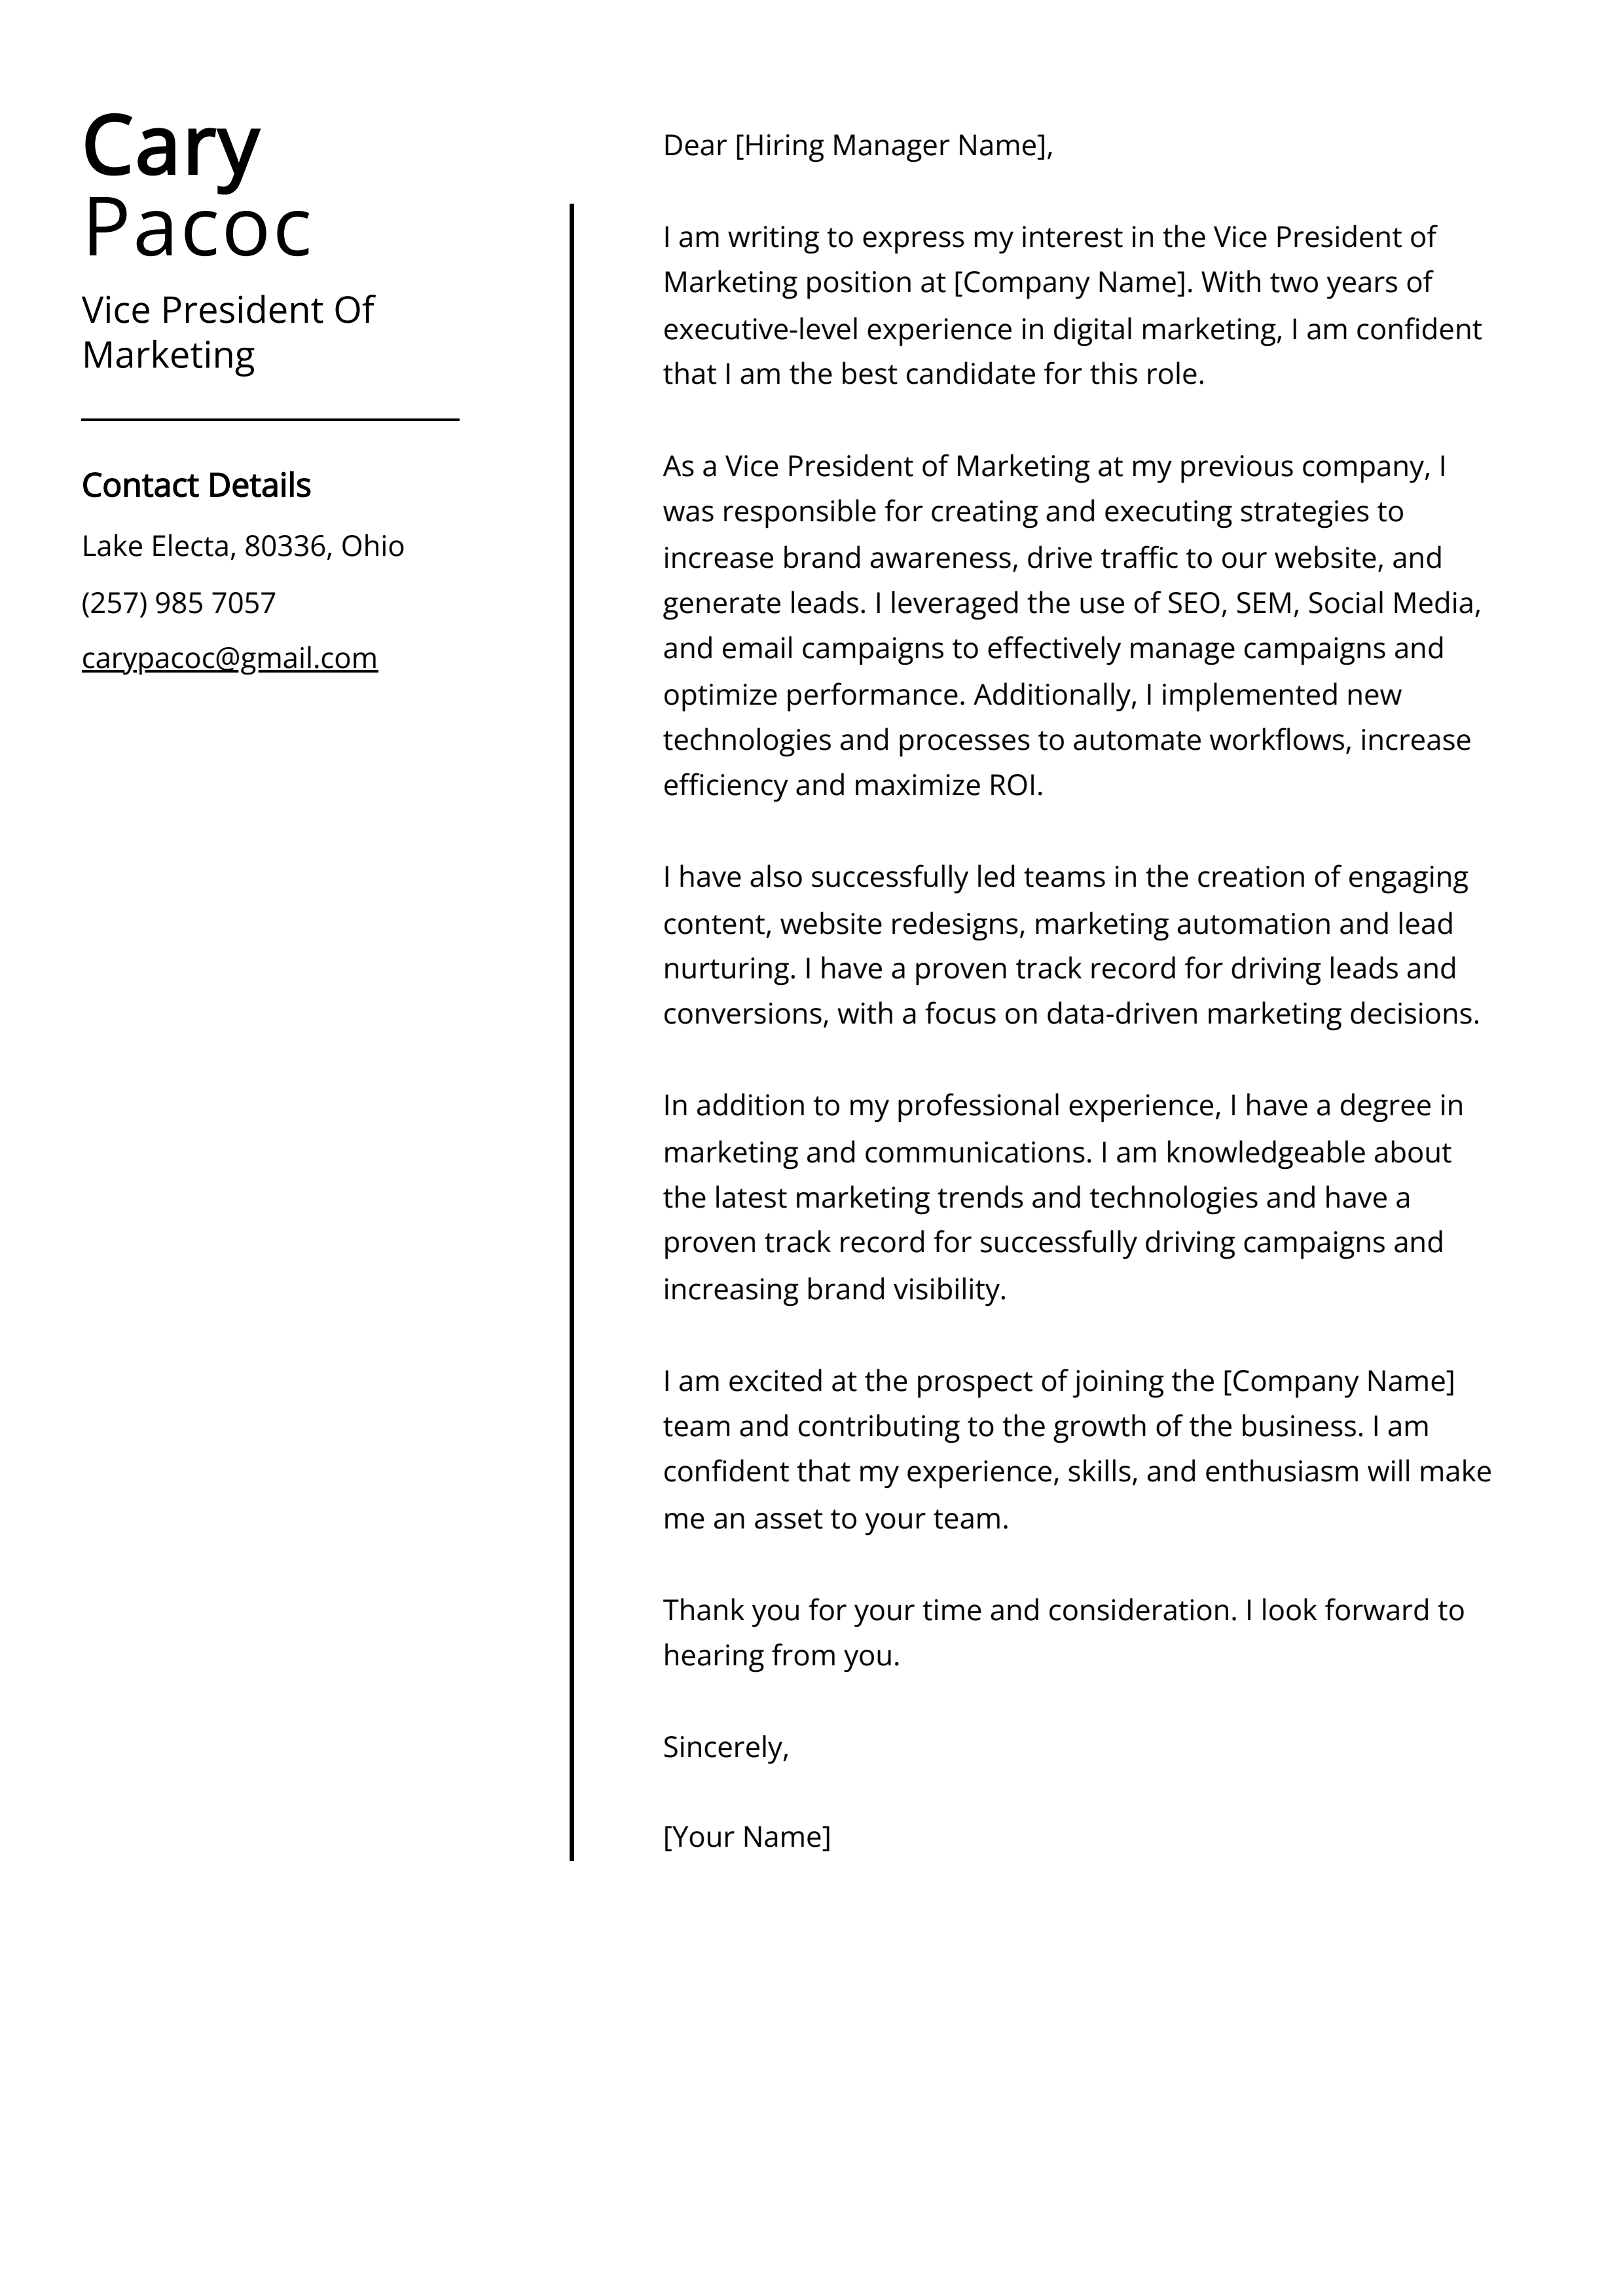 Vice President Of Marketing Cover Letter Example